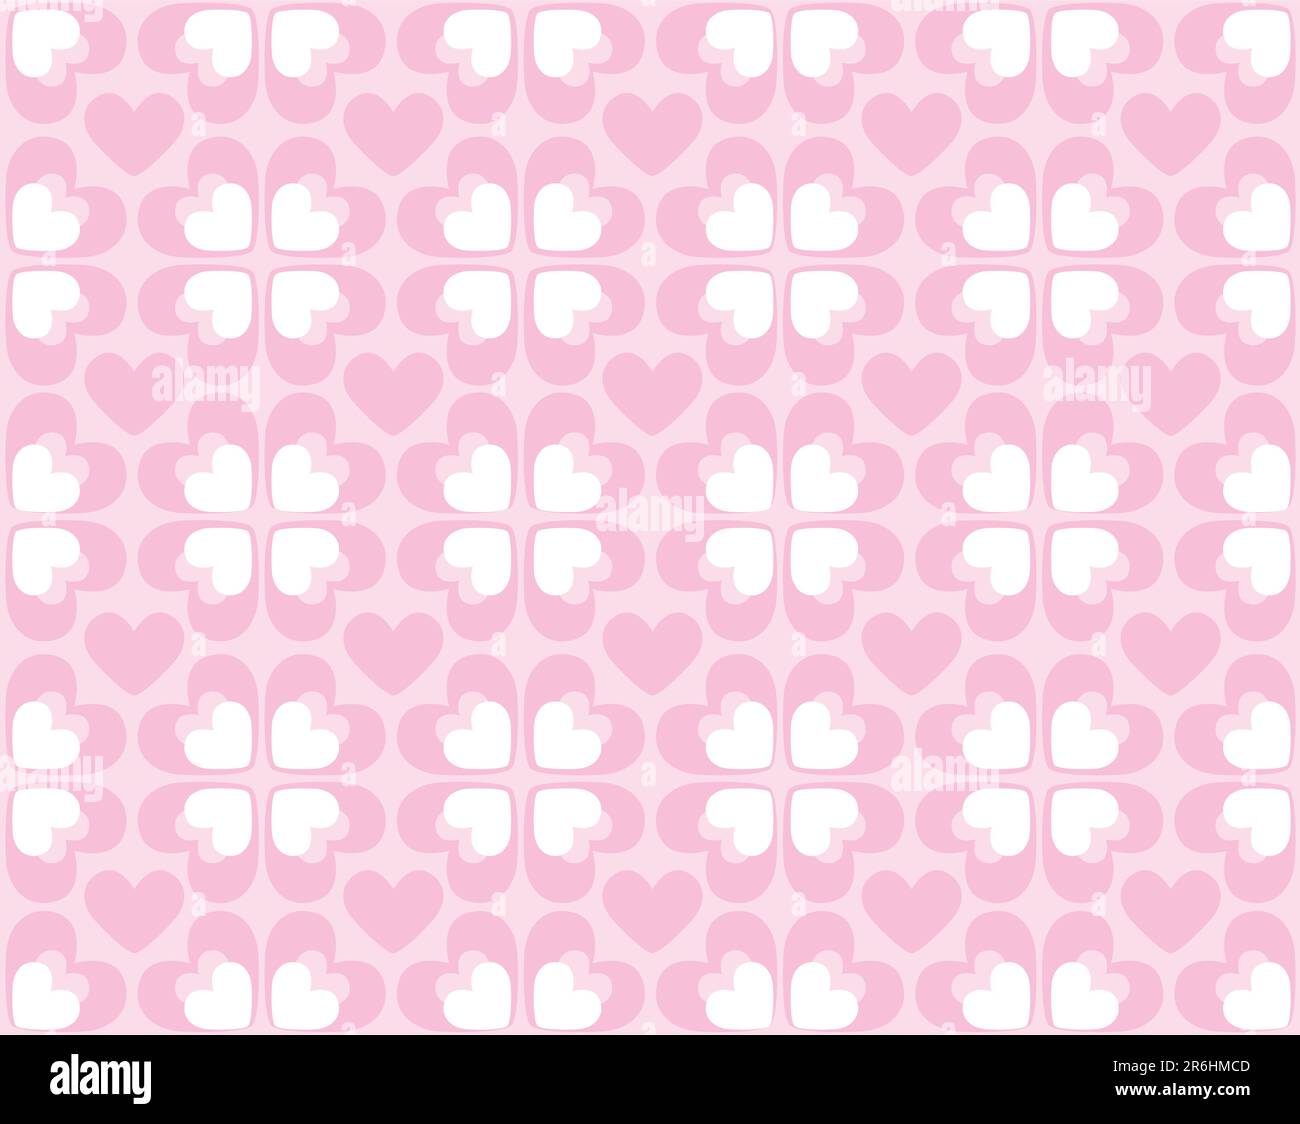 Seamless heart pattern in white an pink Stock Vector